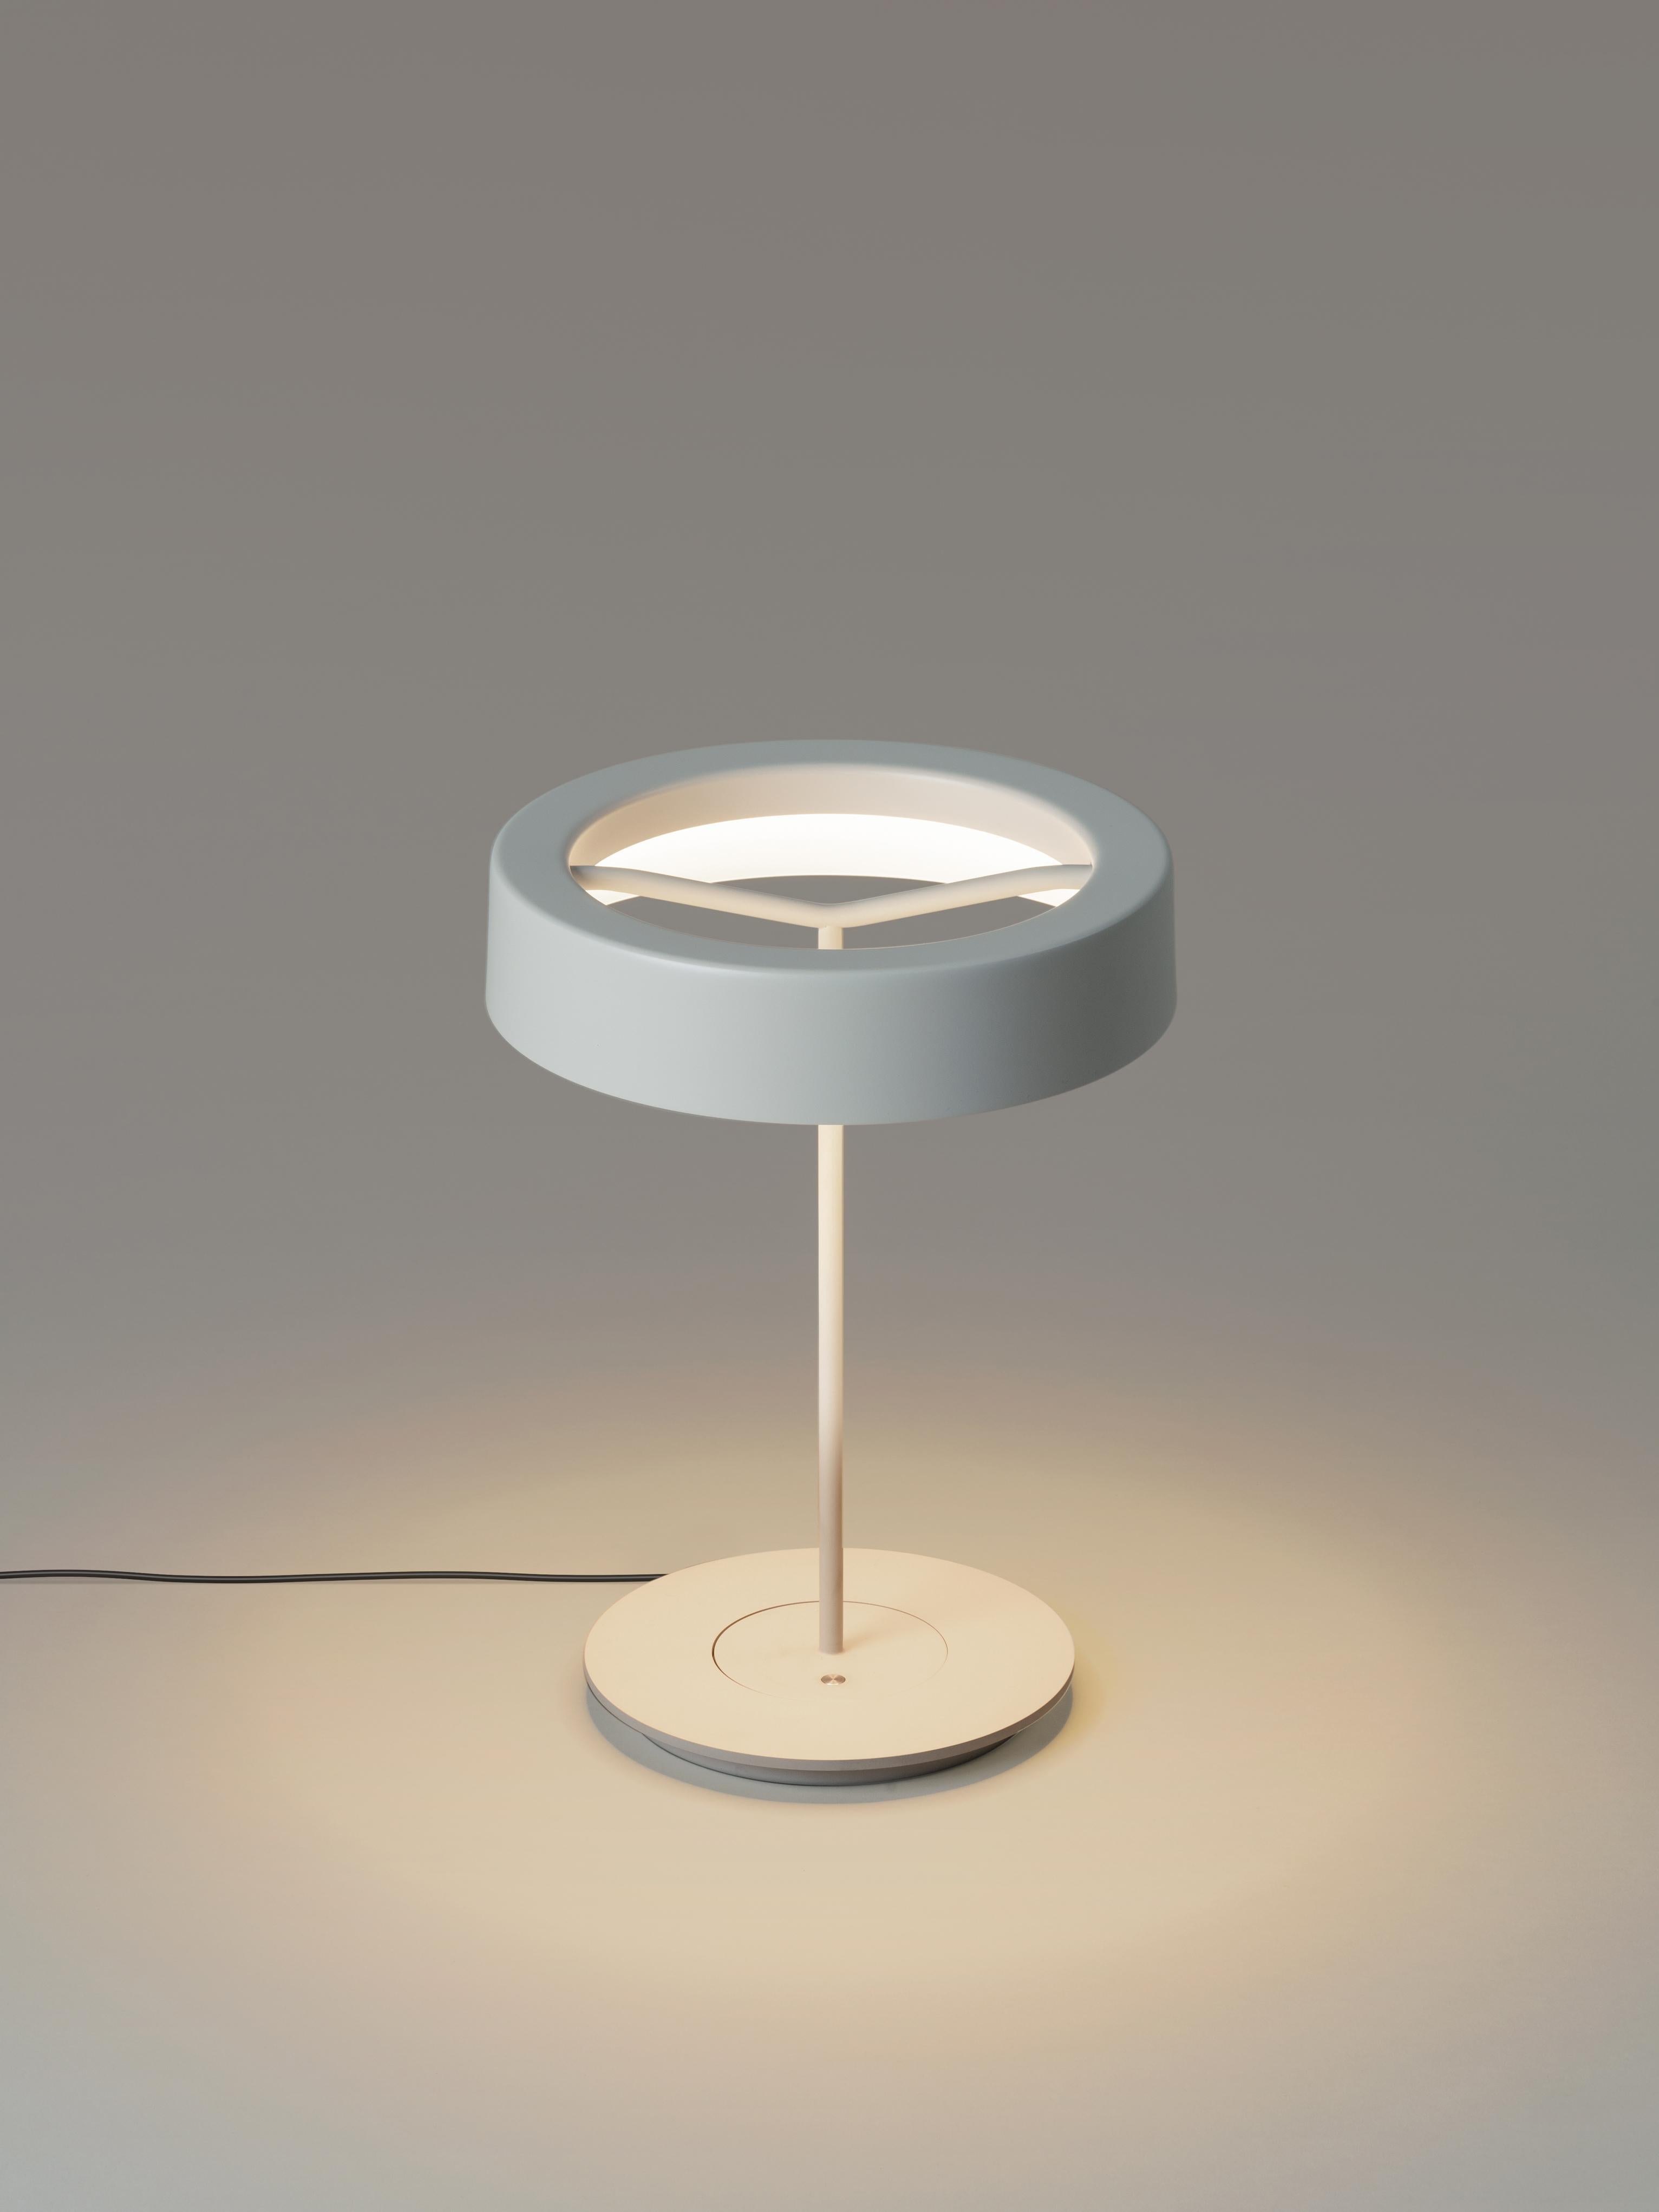 Small white sin table lamp with shade II by Antoni Arola
Dimensions: D 27 x H 36 cm
Materials: Metal.
Lampshade: White S&C aluminium.
Available in white or graphite, with or without shade.

A lamp that combines simplicity and technology to